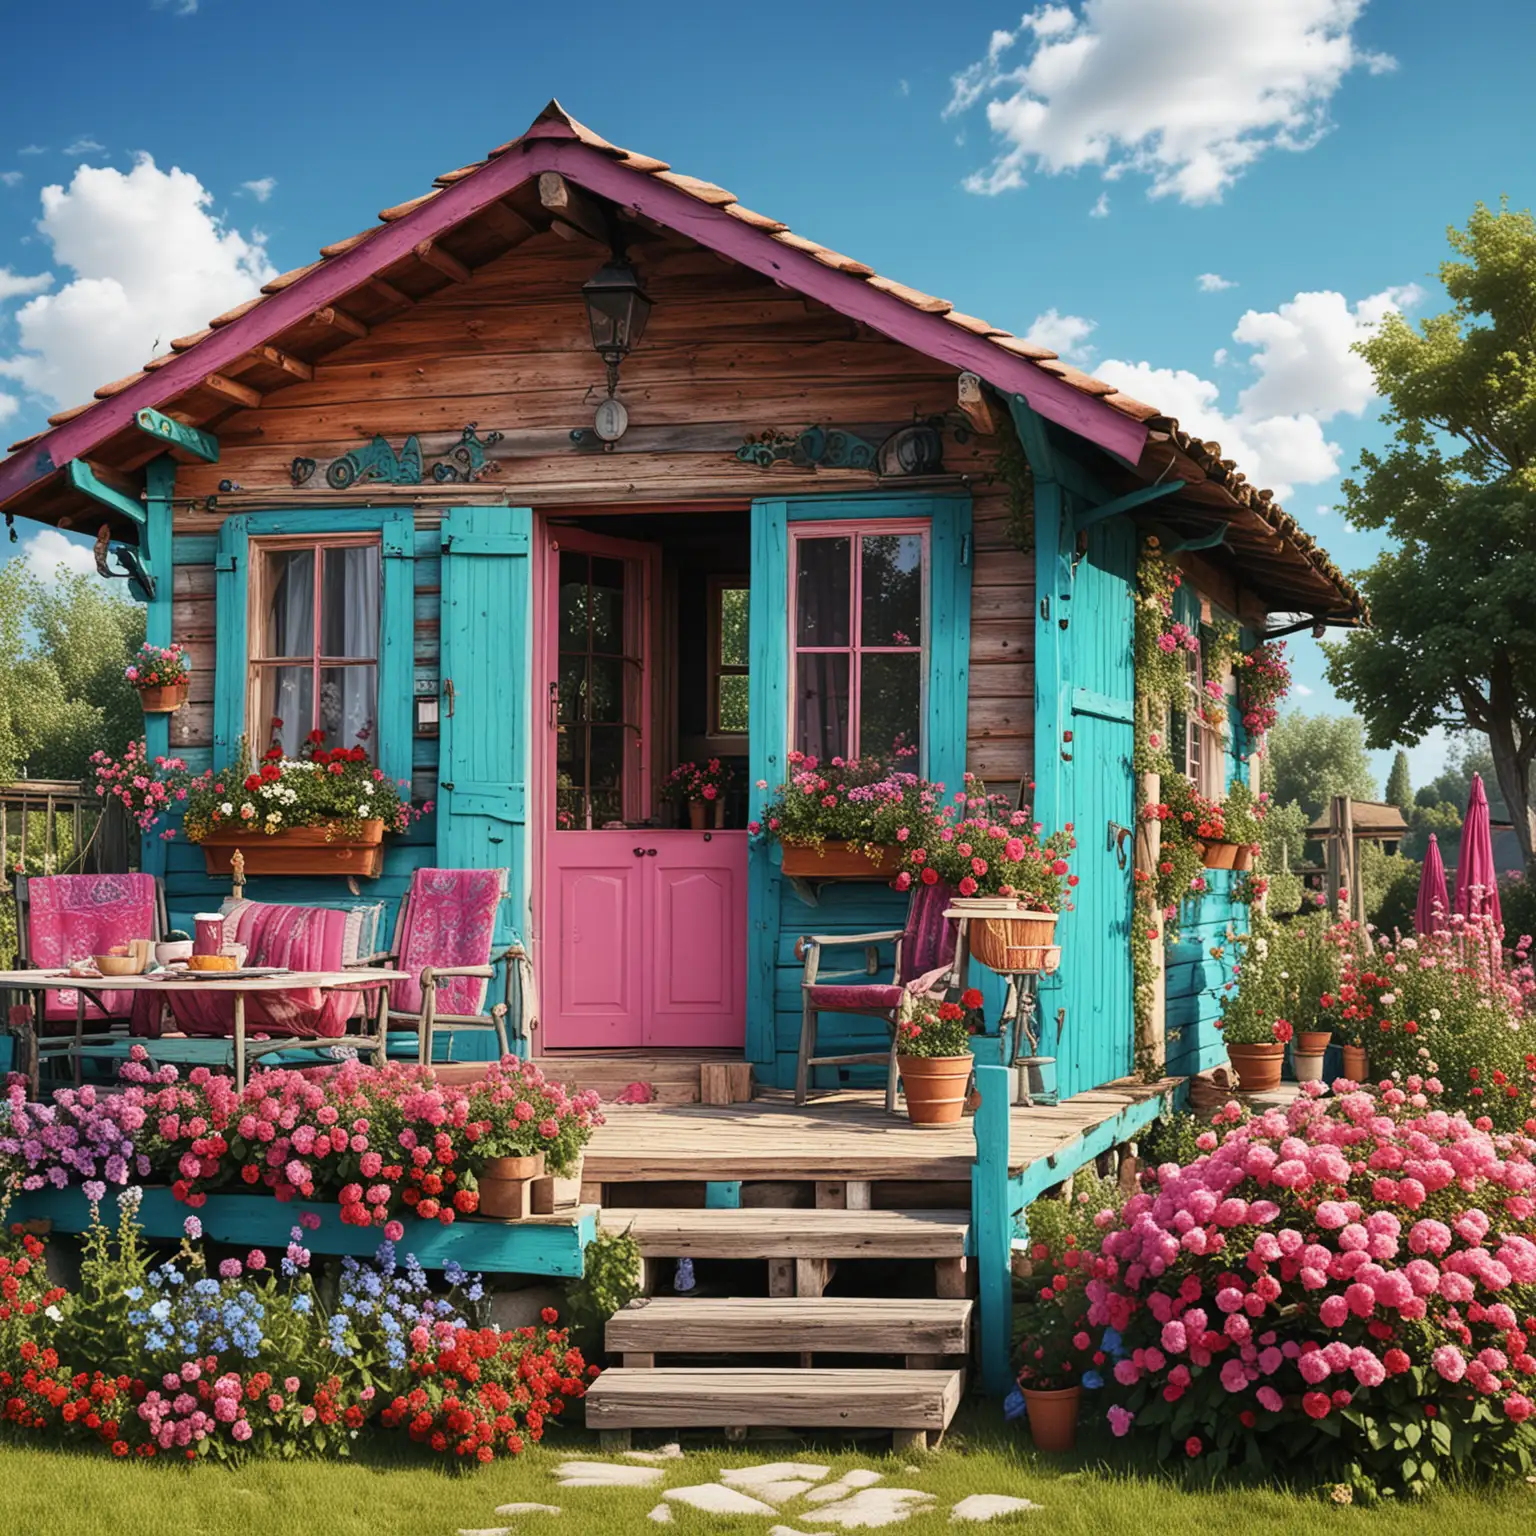 Gypsy style tosca and pink  colorssummer cabin with vibrant variant flowers and beautiful garden, sunny blue sky, realistic, ultra detailed, photography syle, 